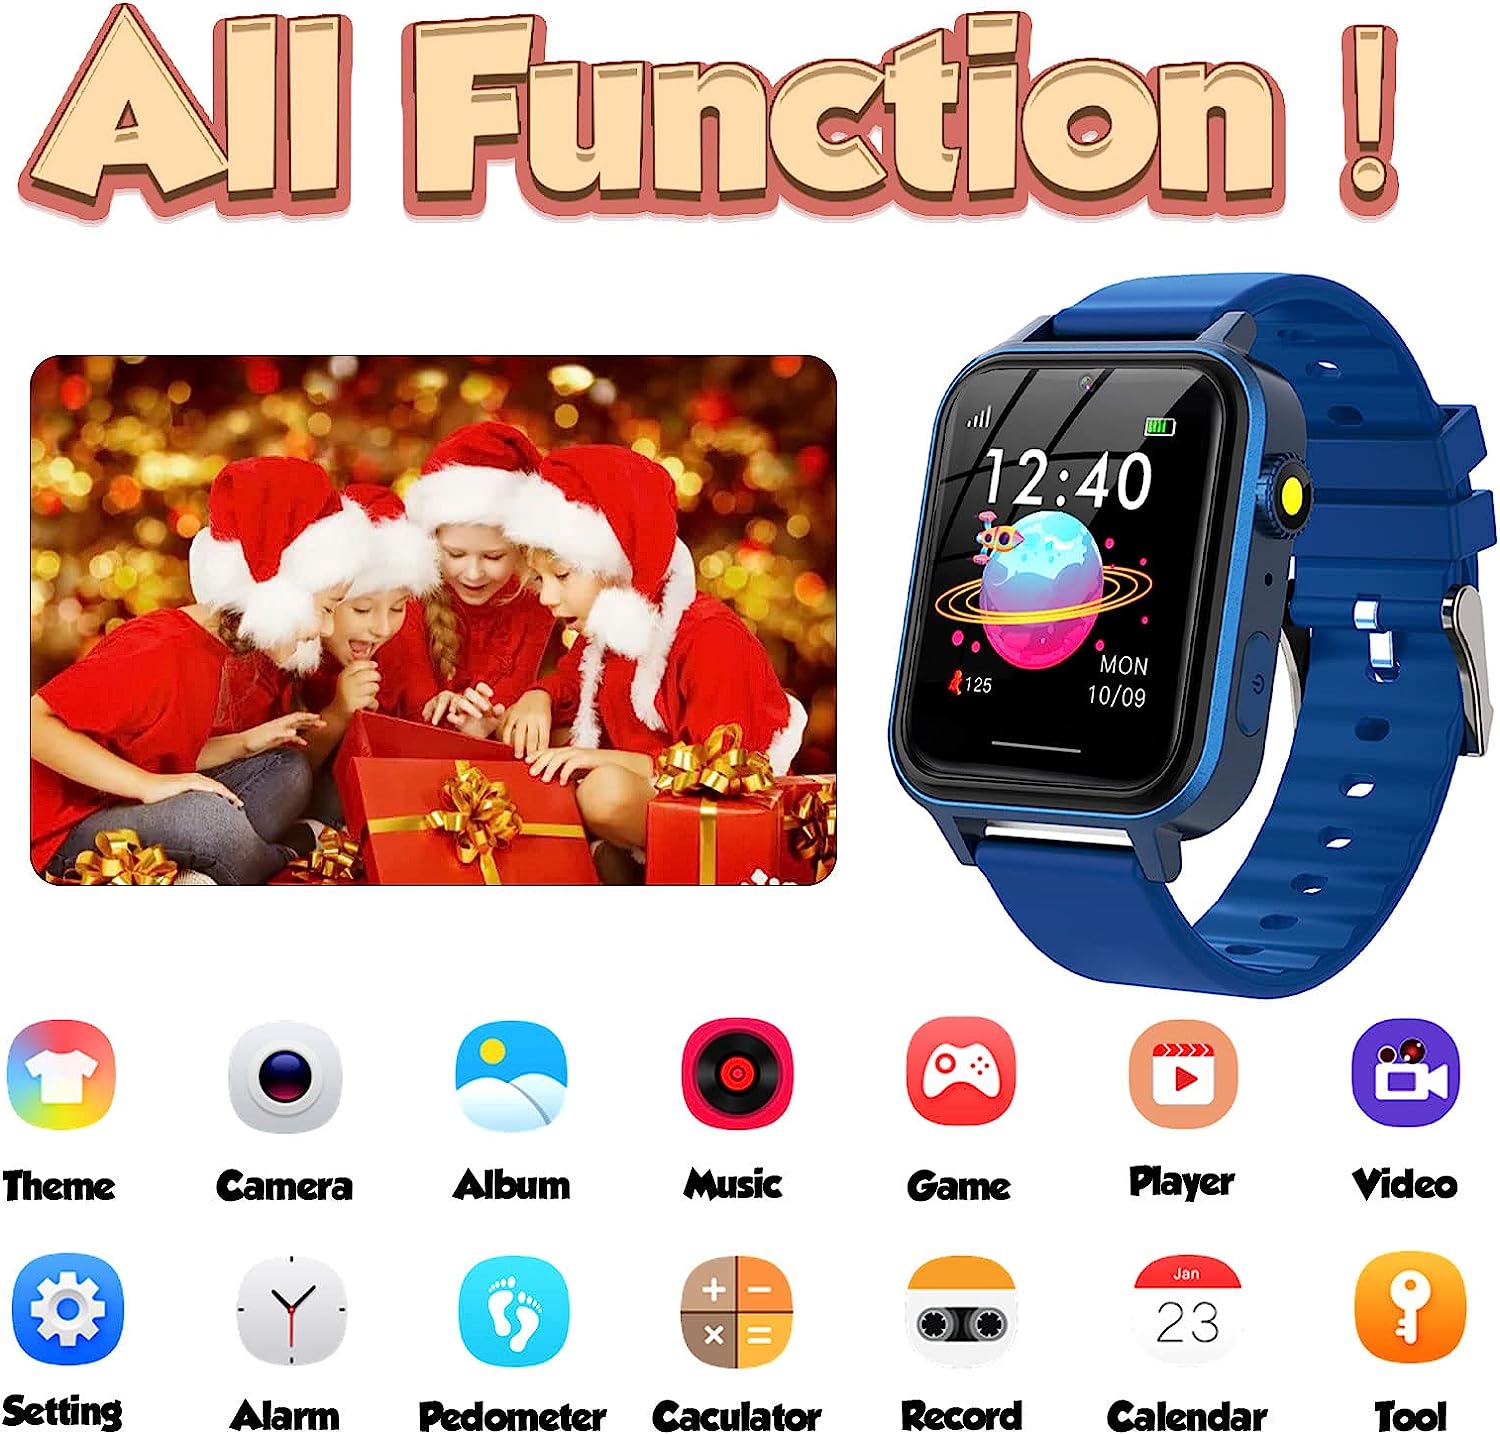 Smart Watch for Kids Learning Educational Toys Gift for Boys & Girls 3-12 Years Old with 10 Learning Games Wallpaper Camera Video Music Player Alarm Clock Calculator Calendar Torch Pedometer